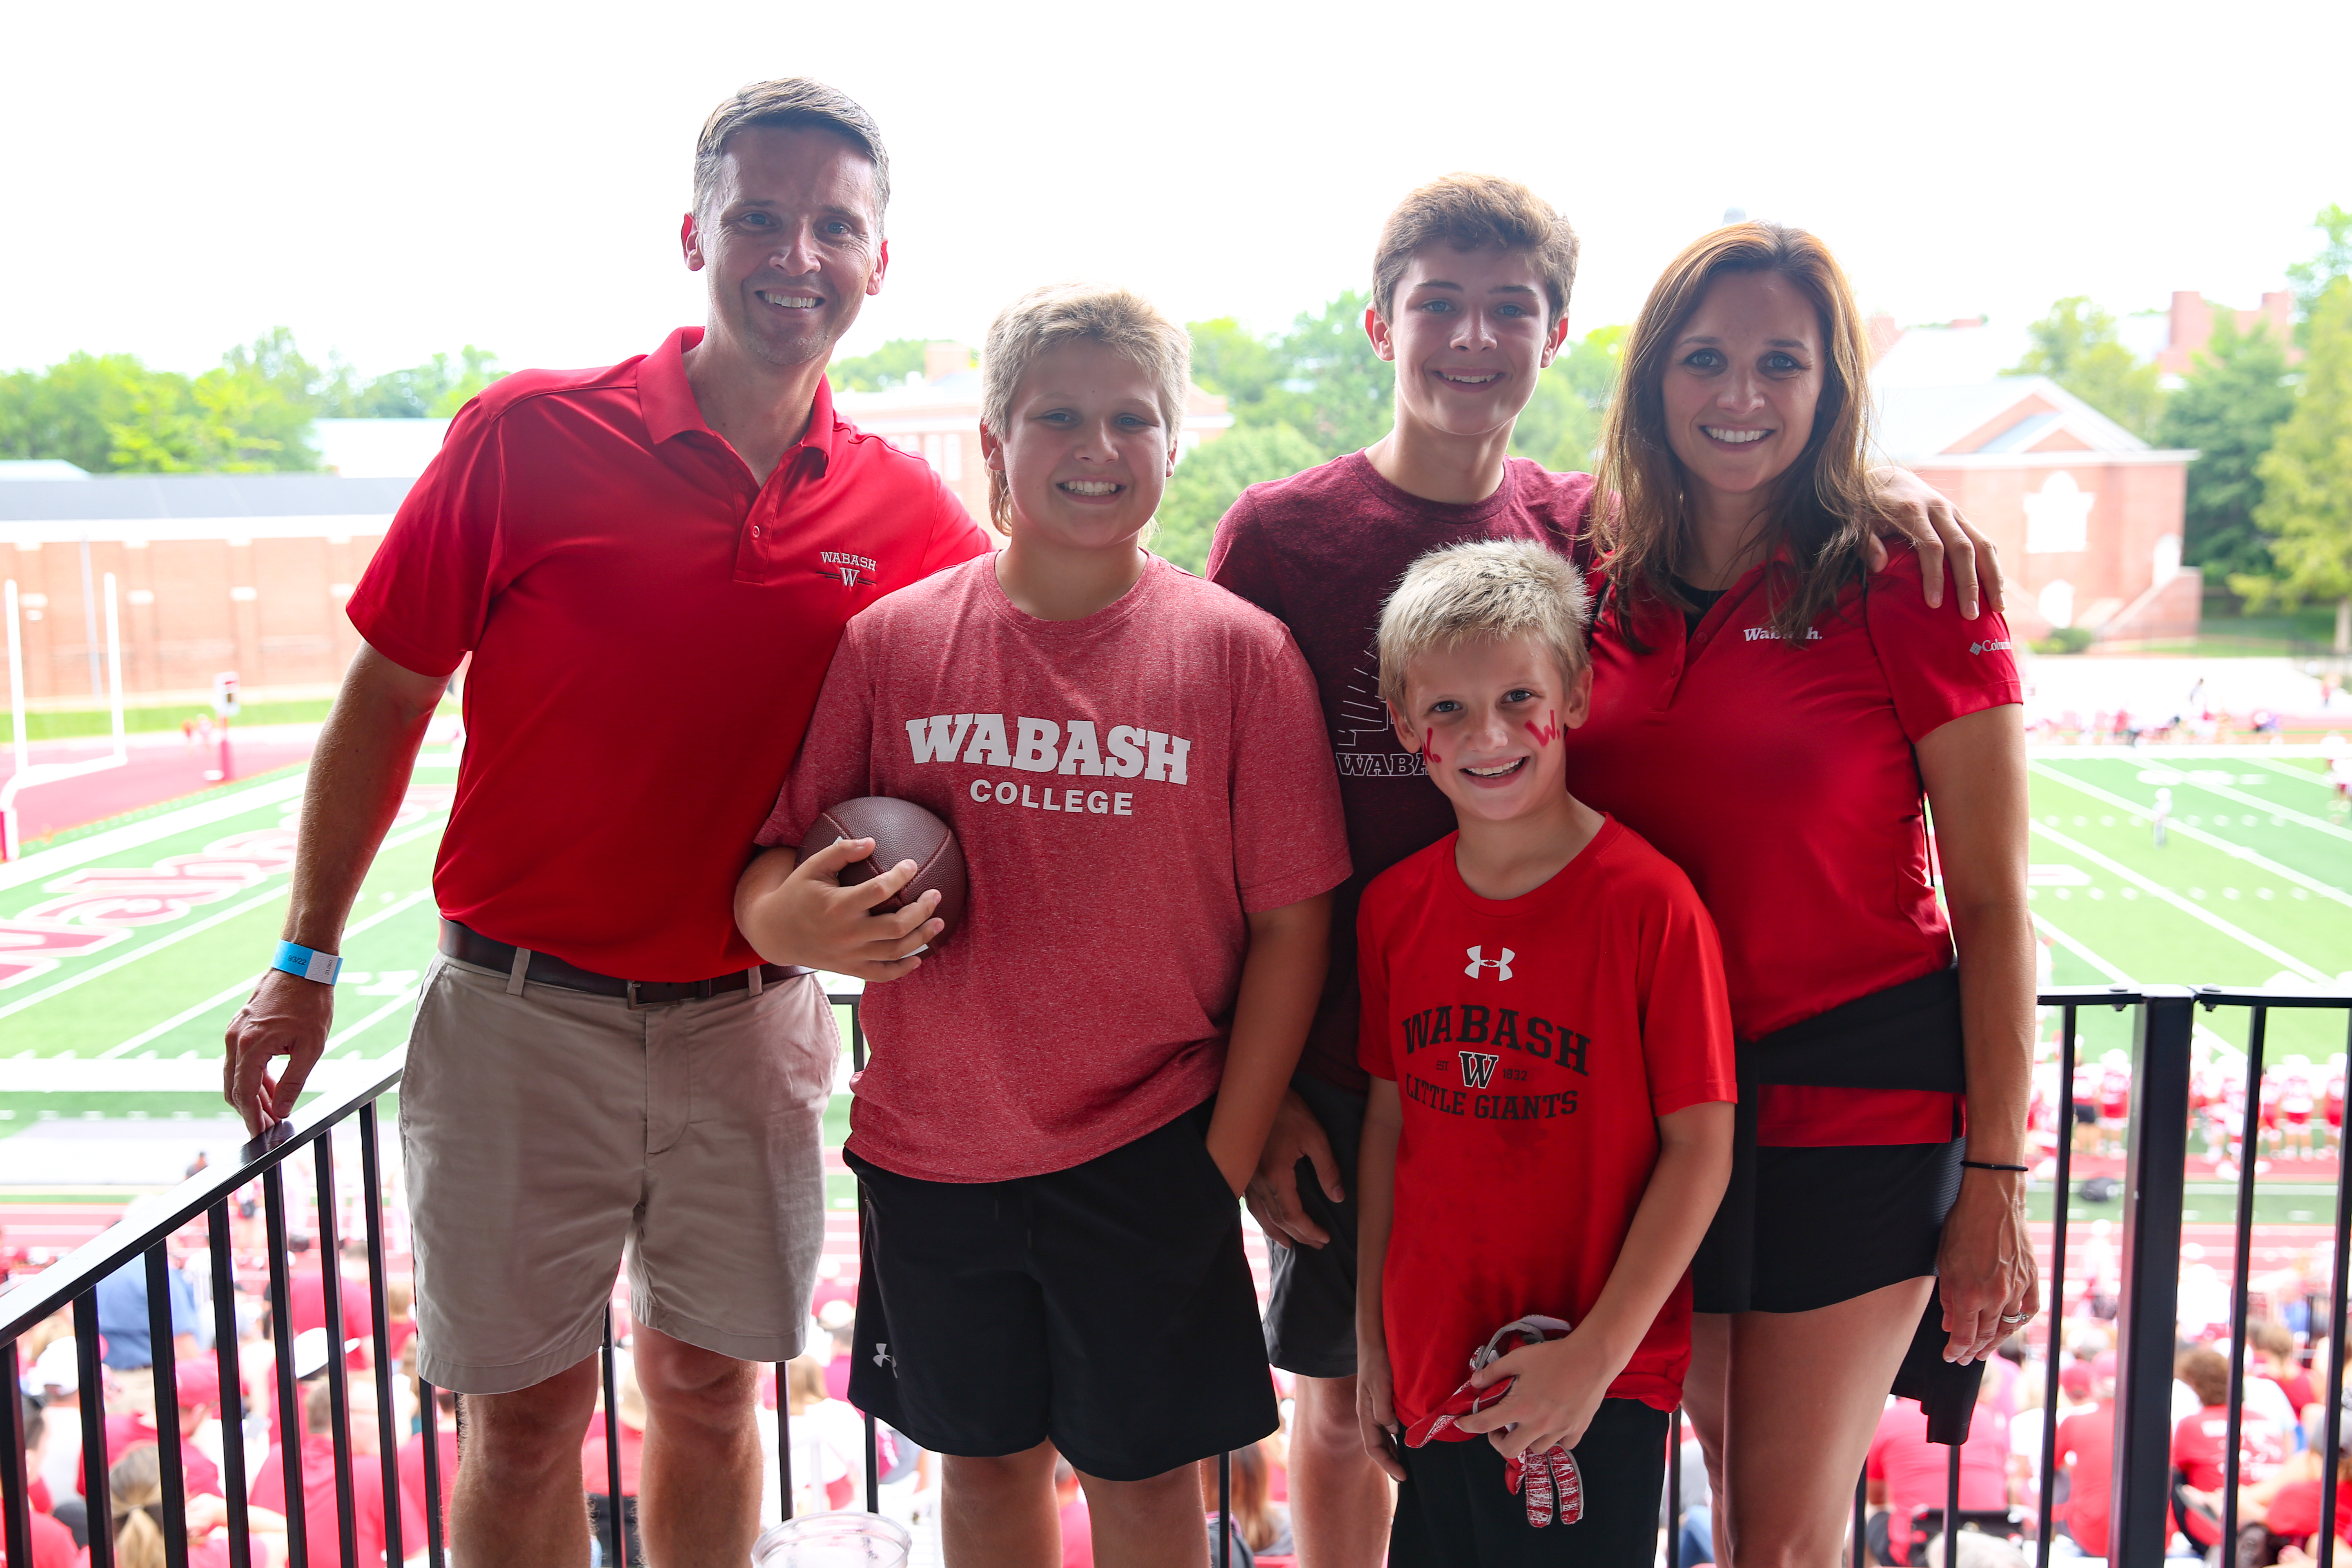 The Chase family returned to campus recently to enjoy a football game at Little Giant Stadium. 